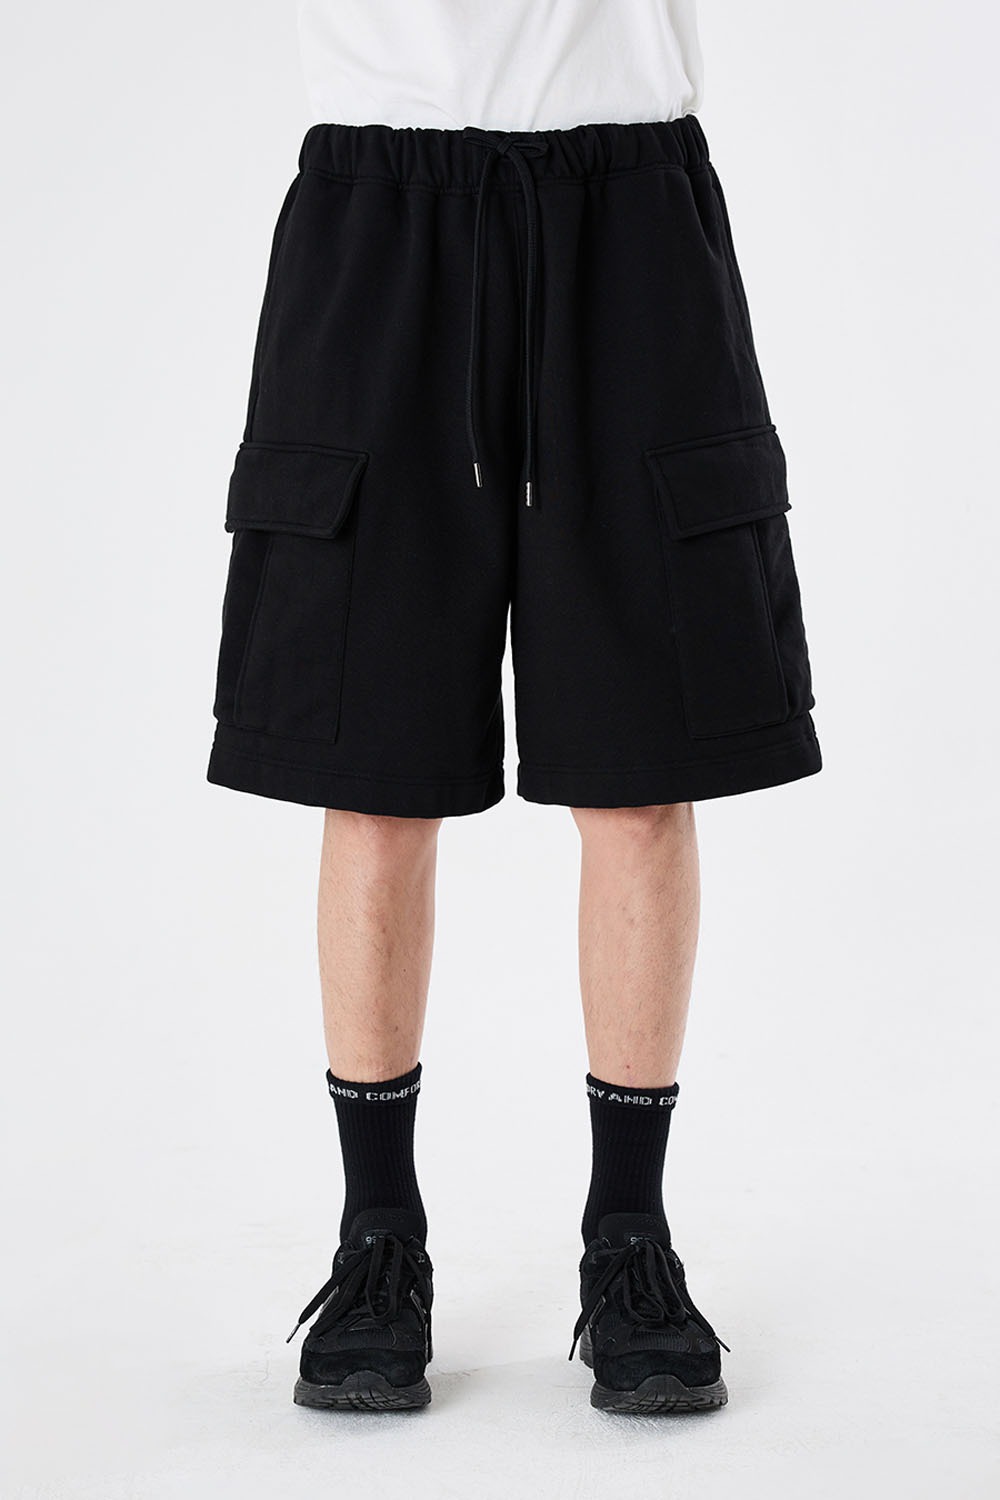 Over Mil Sweat Shorts-Black